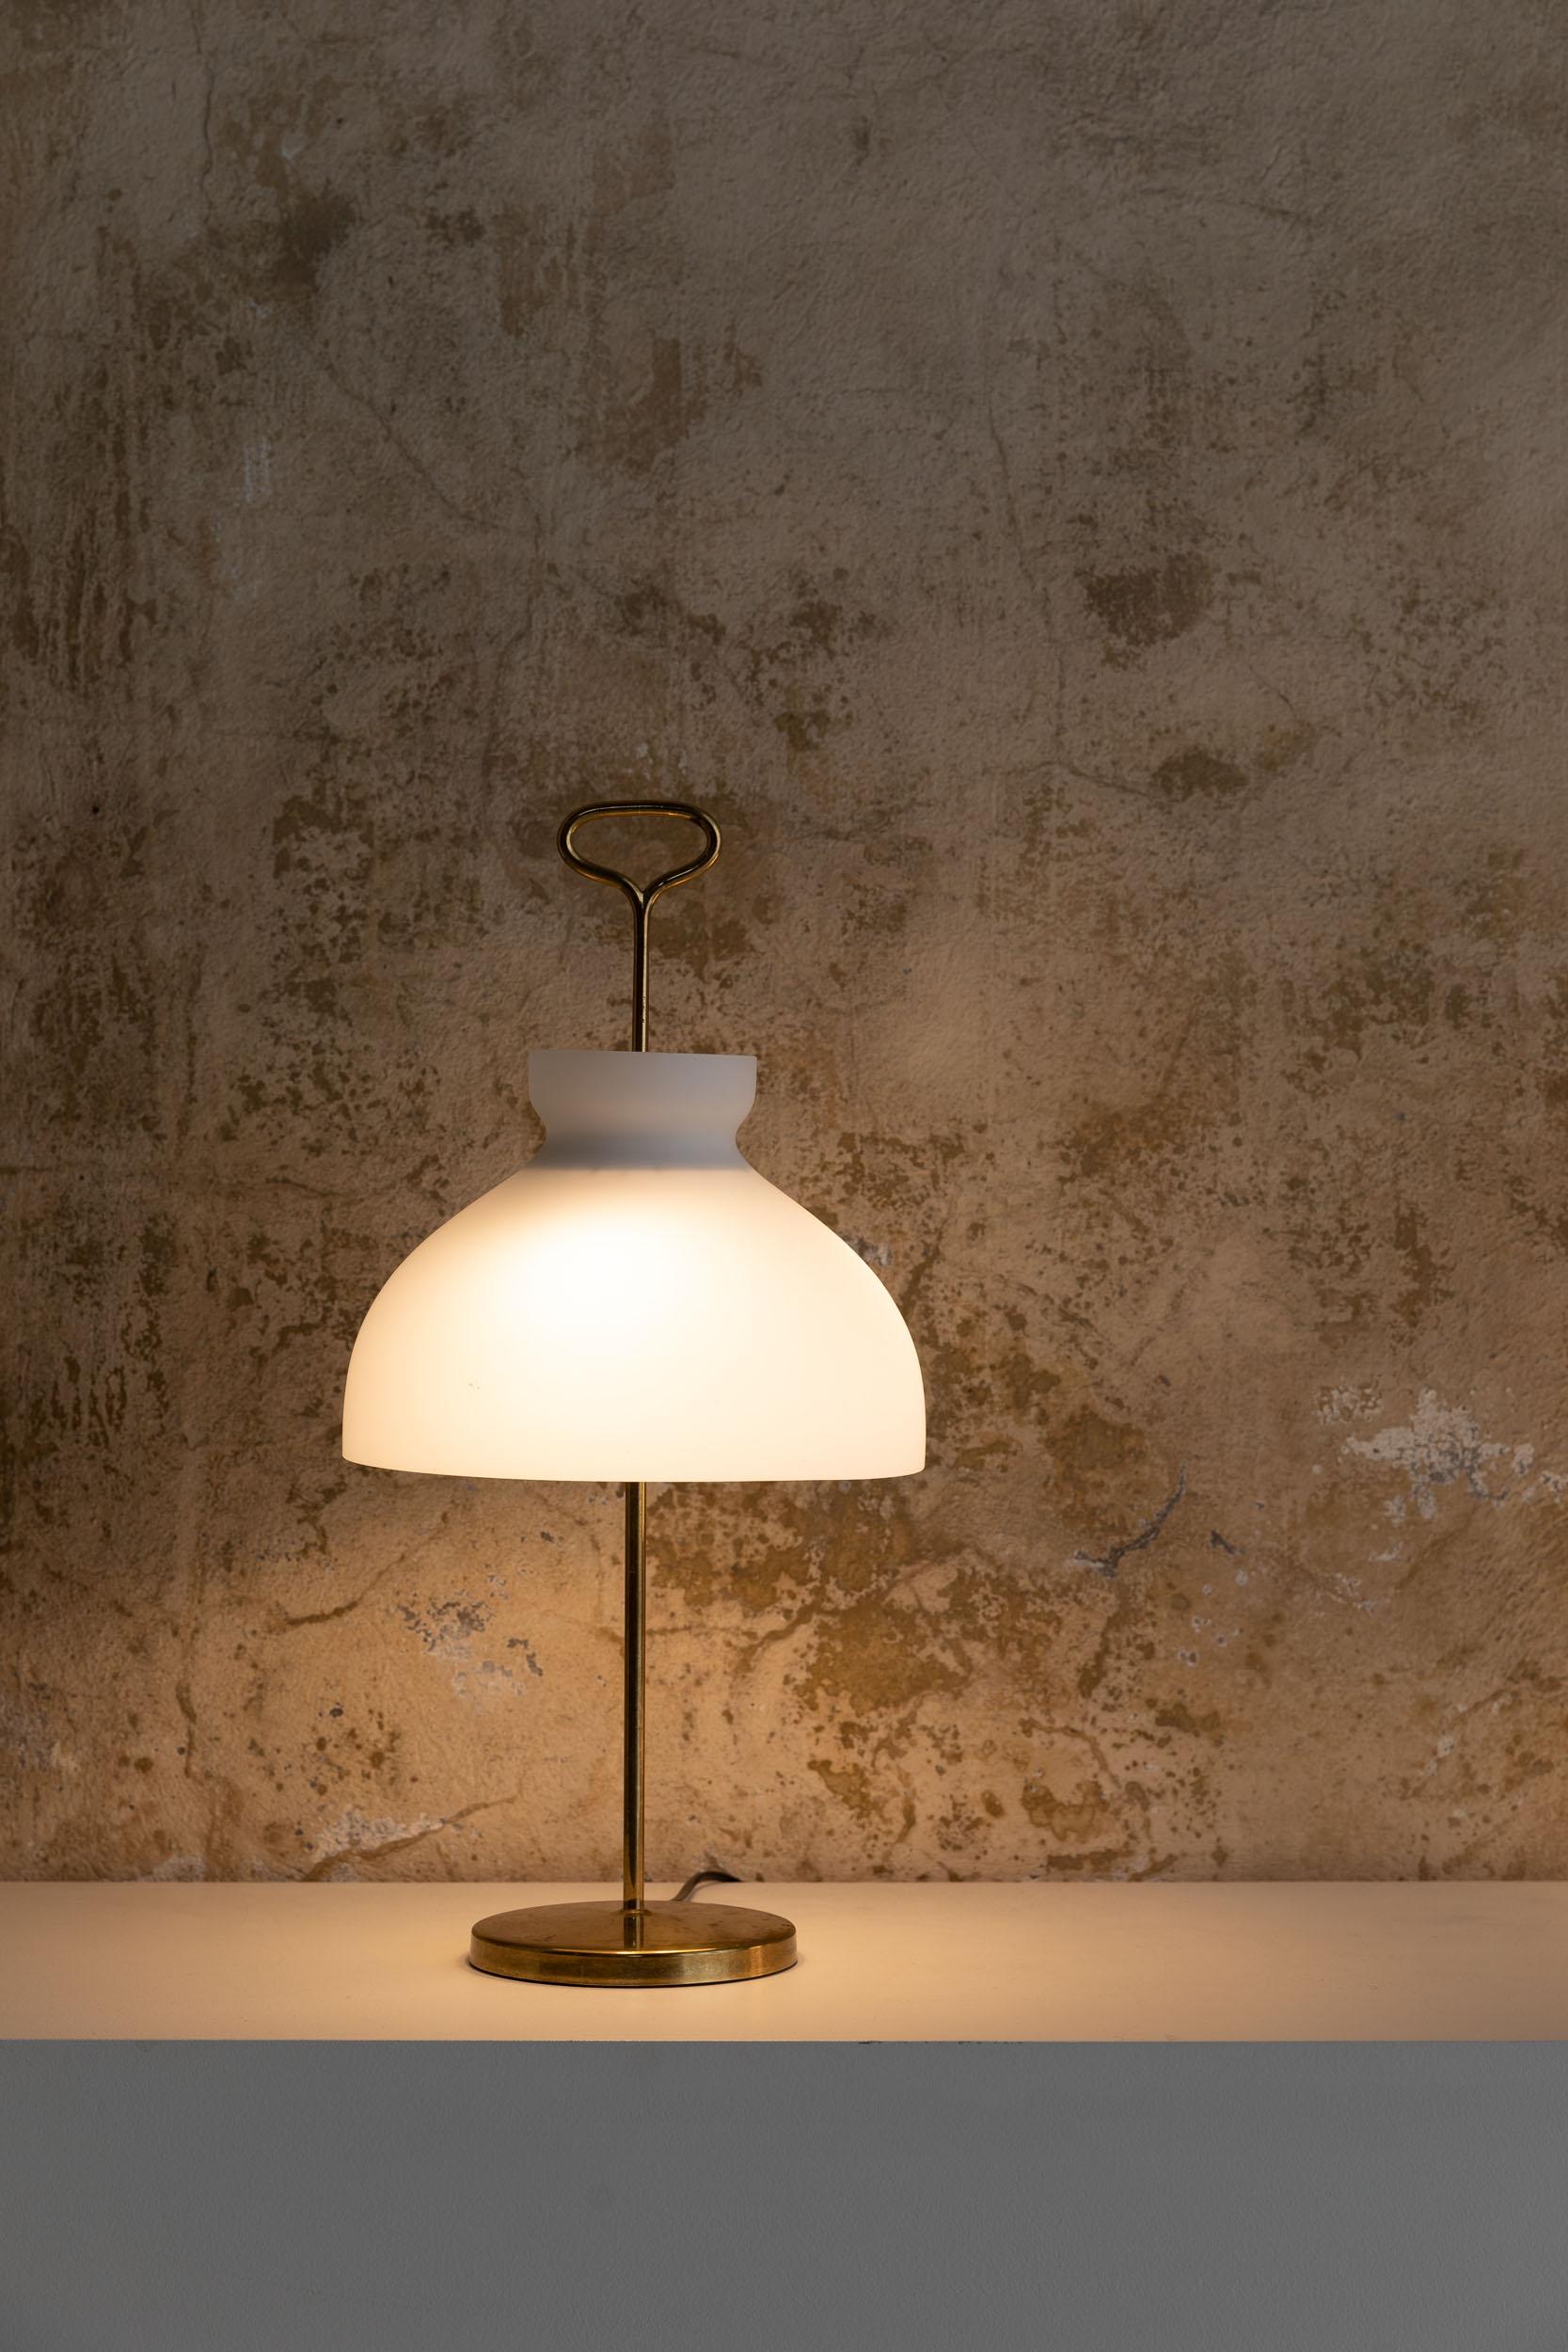 Stunning large Arenzano table lamp by Ignazio Gardella for Azucena, it can be coupled with the smaller Size table lamp you can see in the images. 
Opaline glass mounted on golden brass structure with beautiful original patina, Italy 1956.